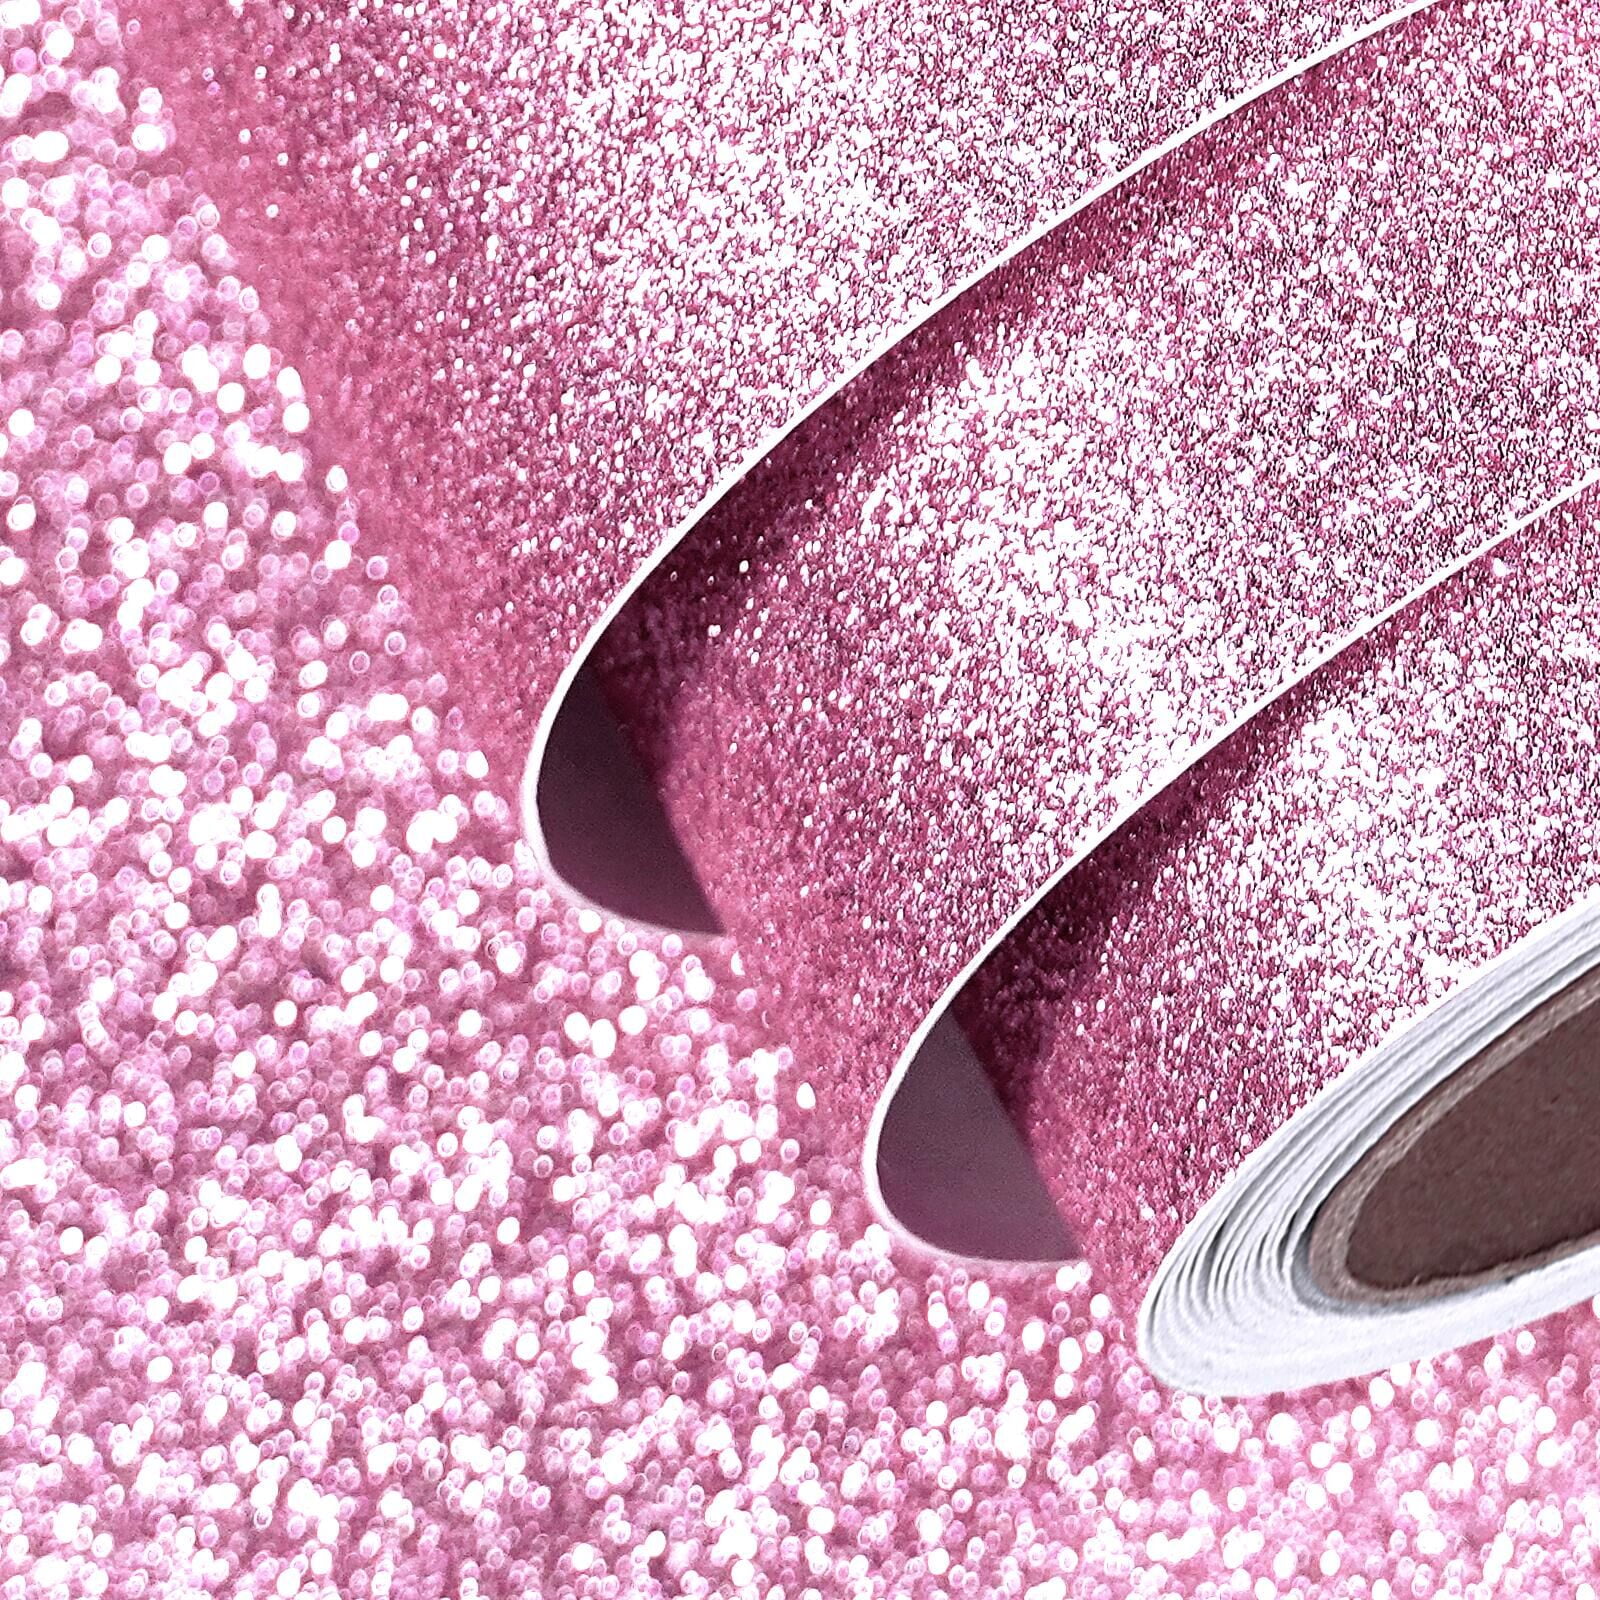 FunStick Sparkly Pink Glitter Cardstock Paper 15.8x78.8 Colored Contact  Paper for Cricut Premium Crafts Self Adhesive for DIY Card Making Gift  Birthday 